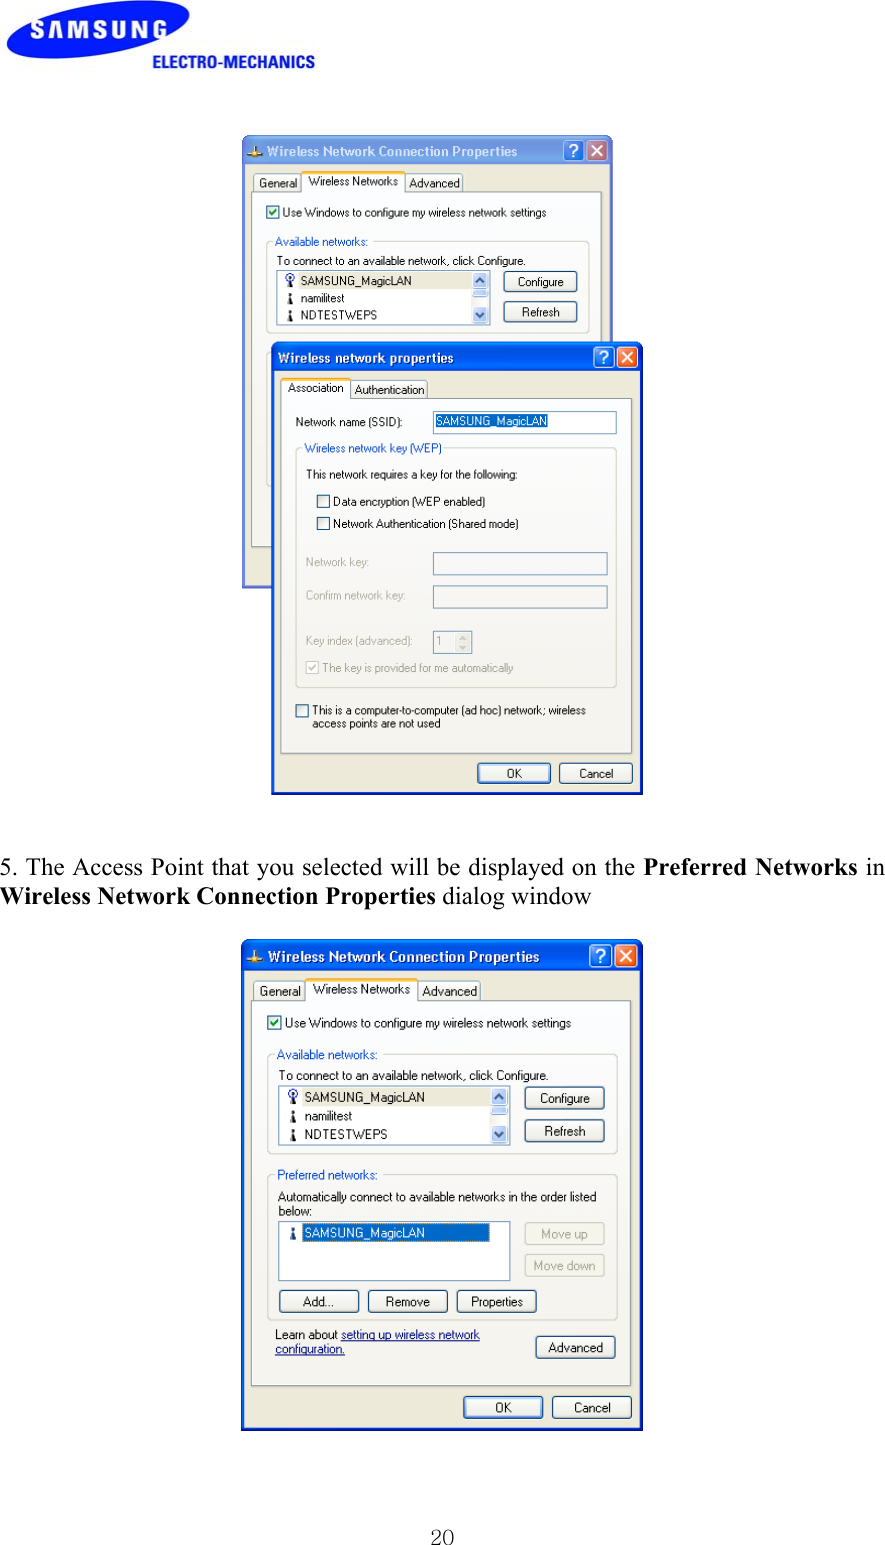 205. The Access Point that you selected will be displayed on the Preferred Networks inWireless Network Connection Properties dialog window